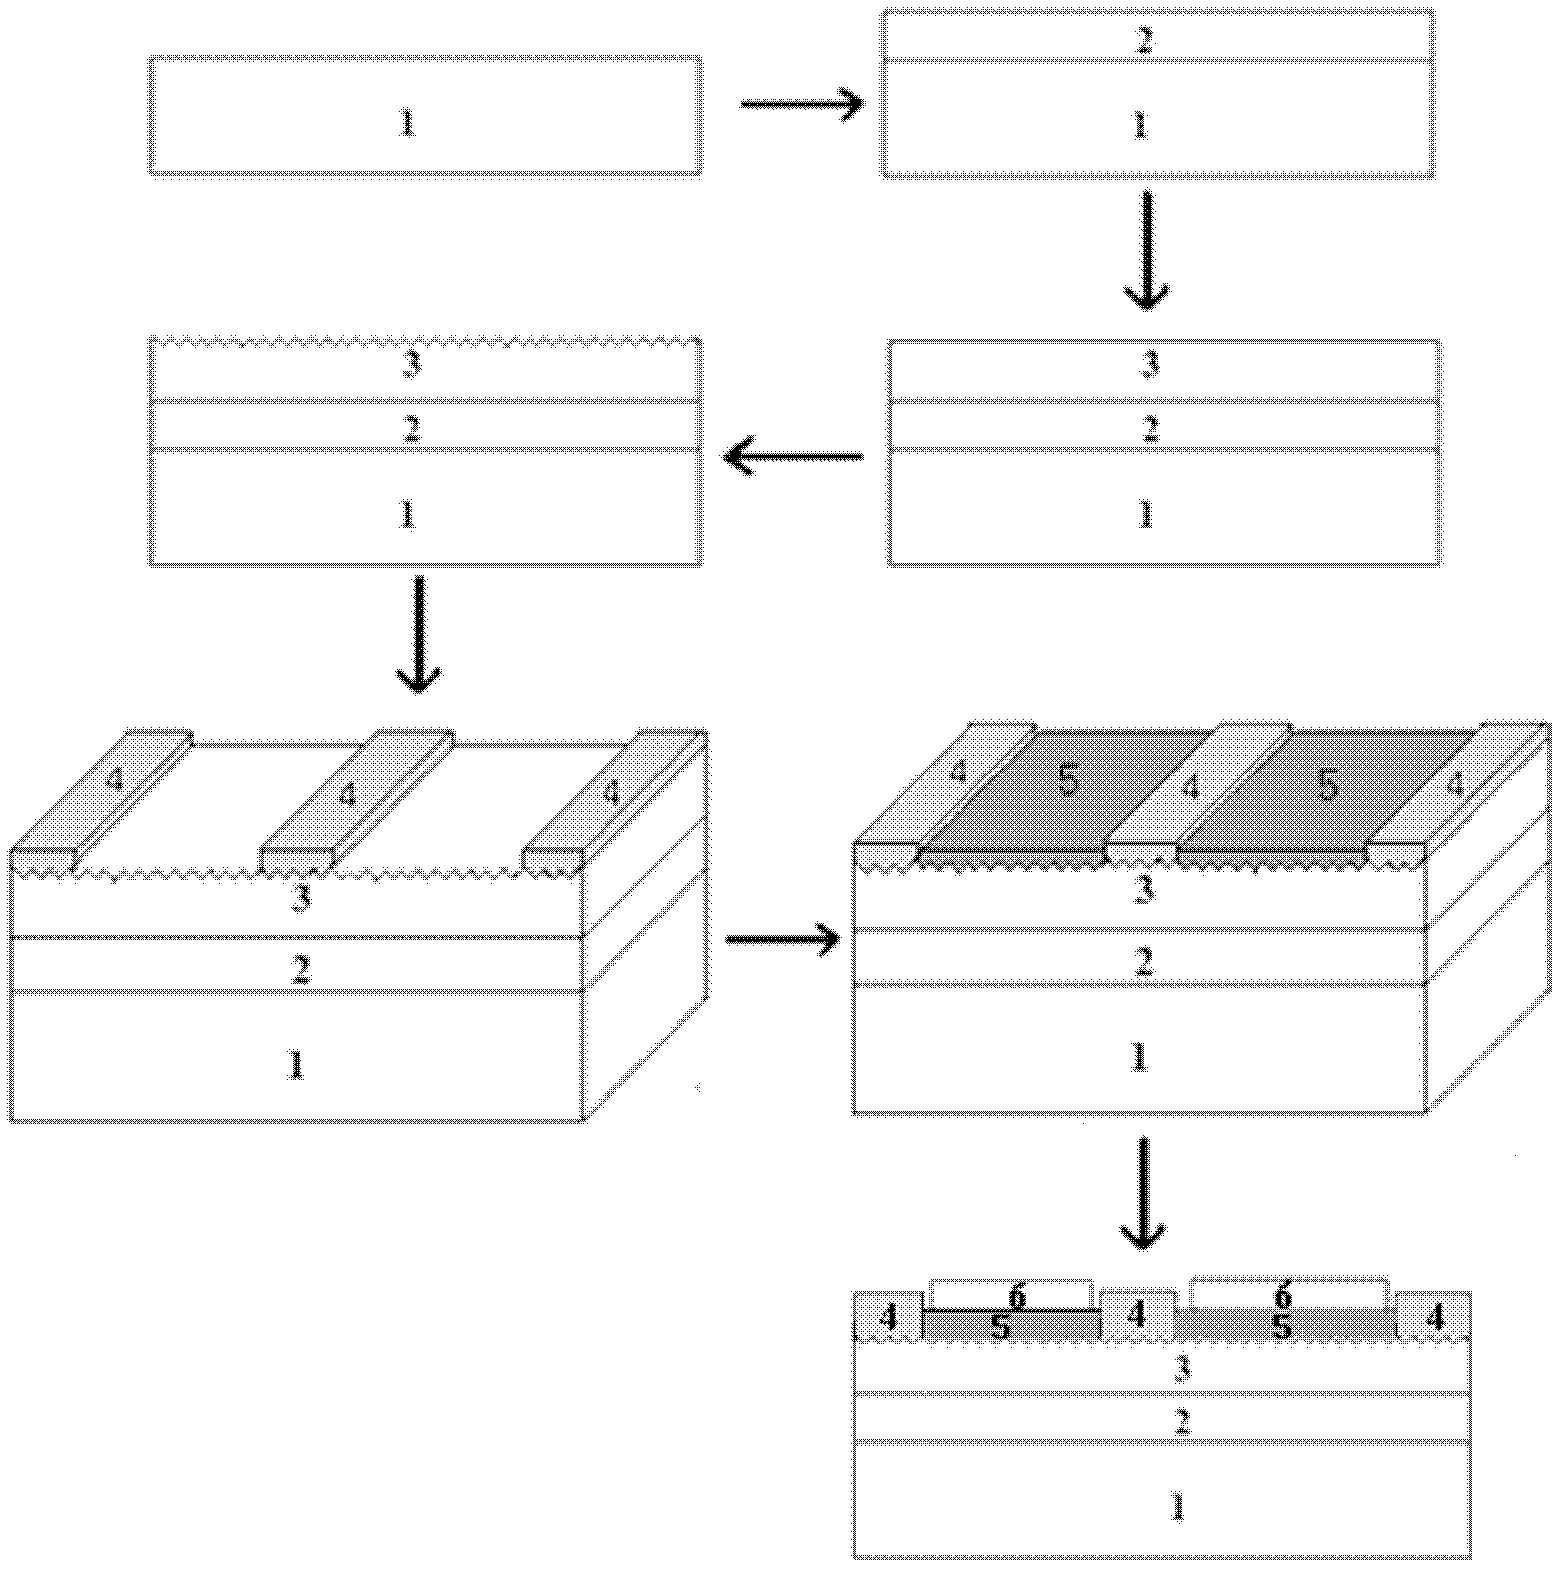 Nitrogen-faced gallium nitride suede solar cell and fabrication method thereof